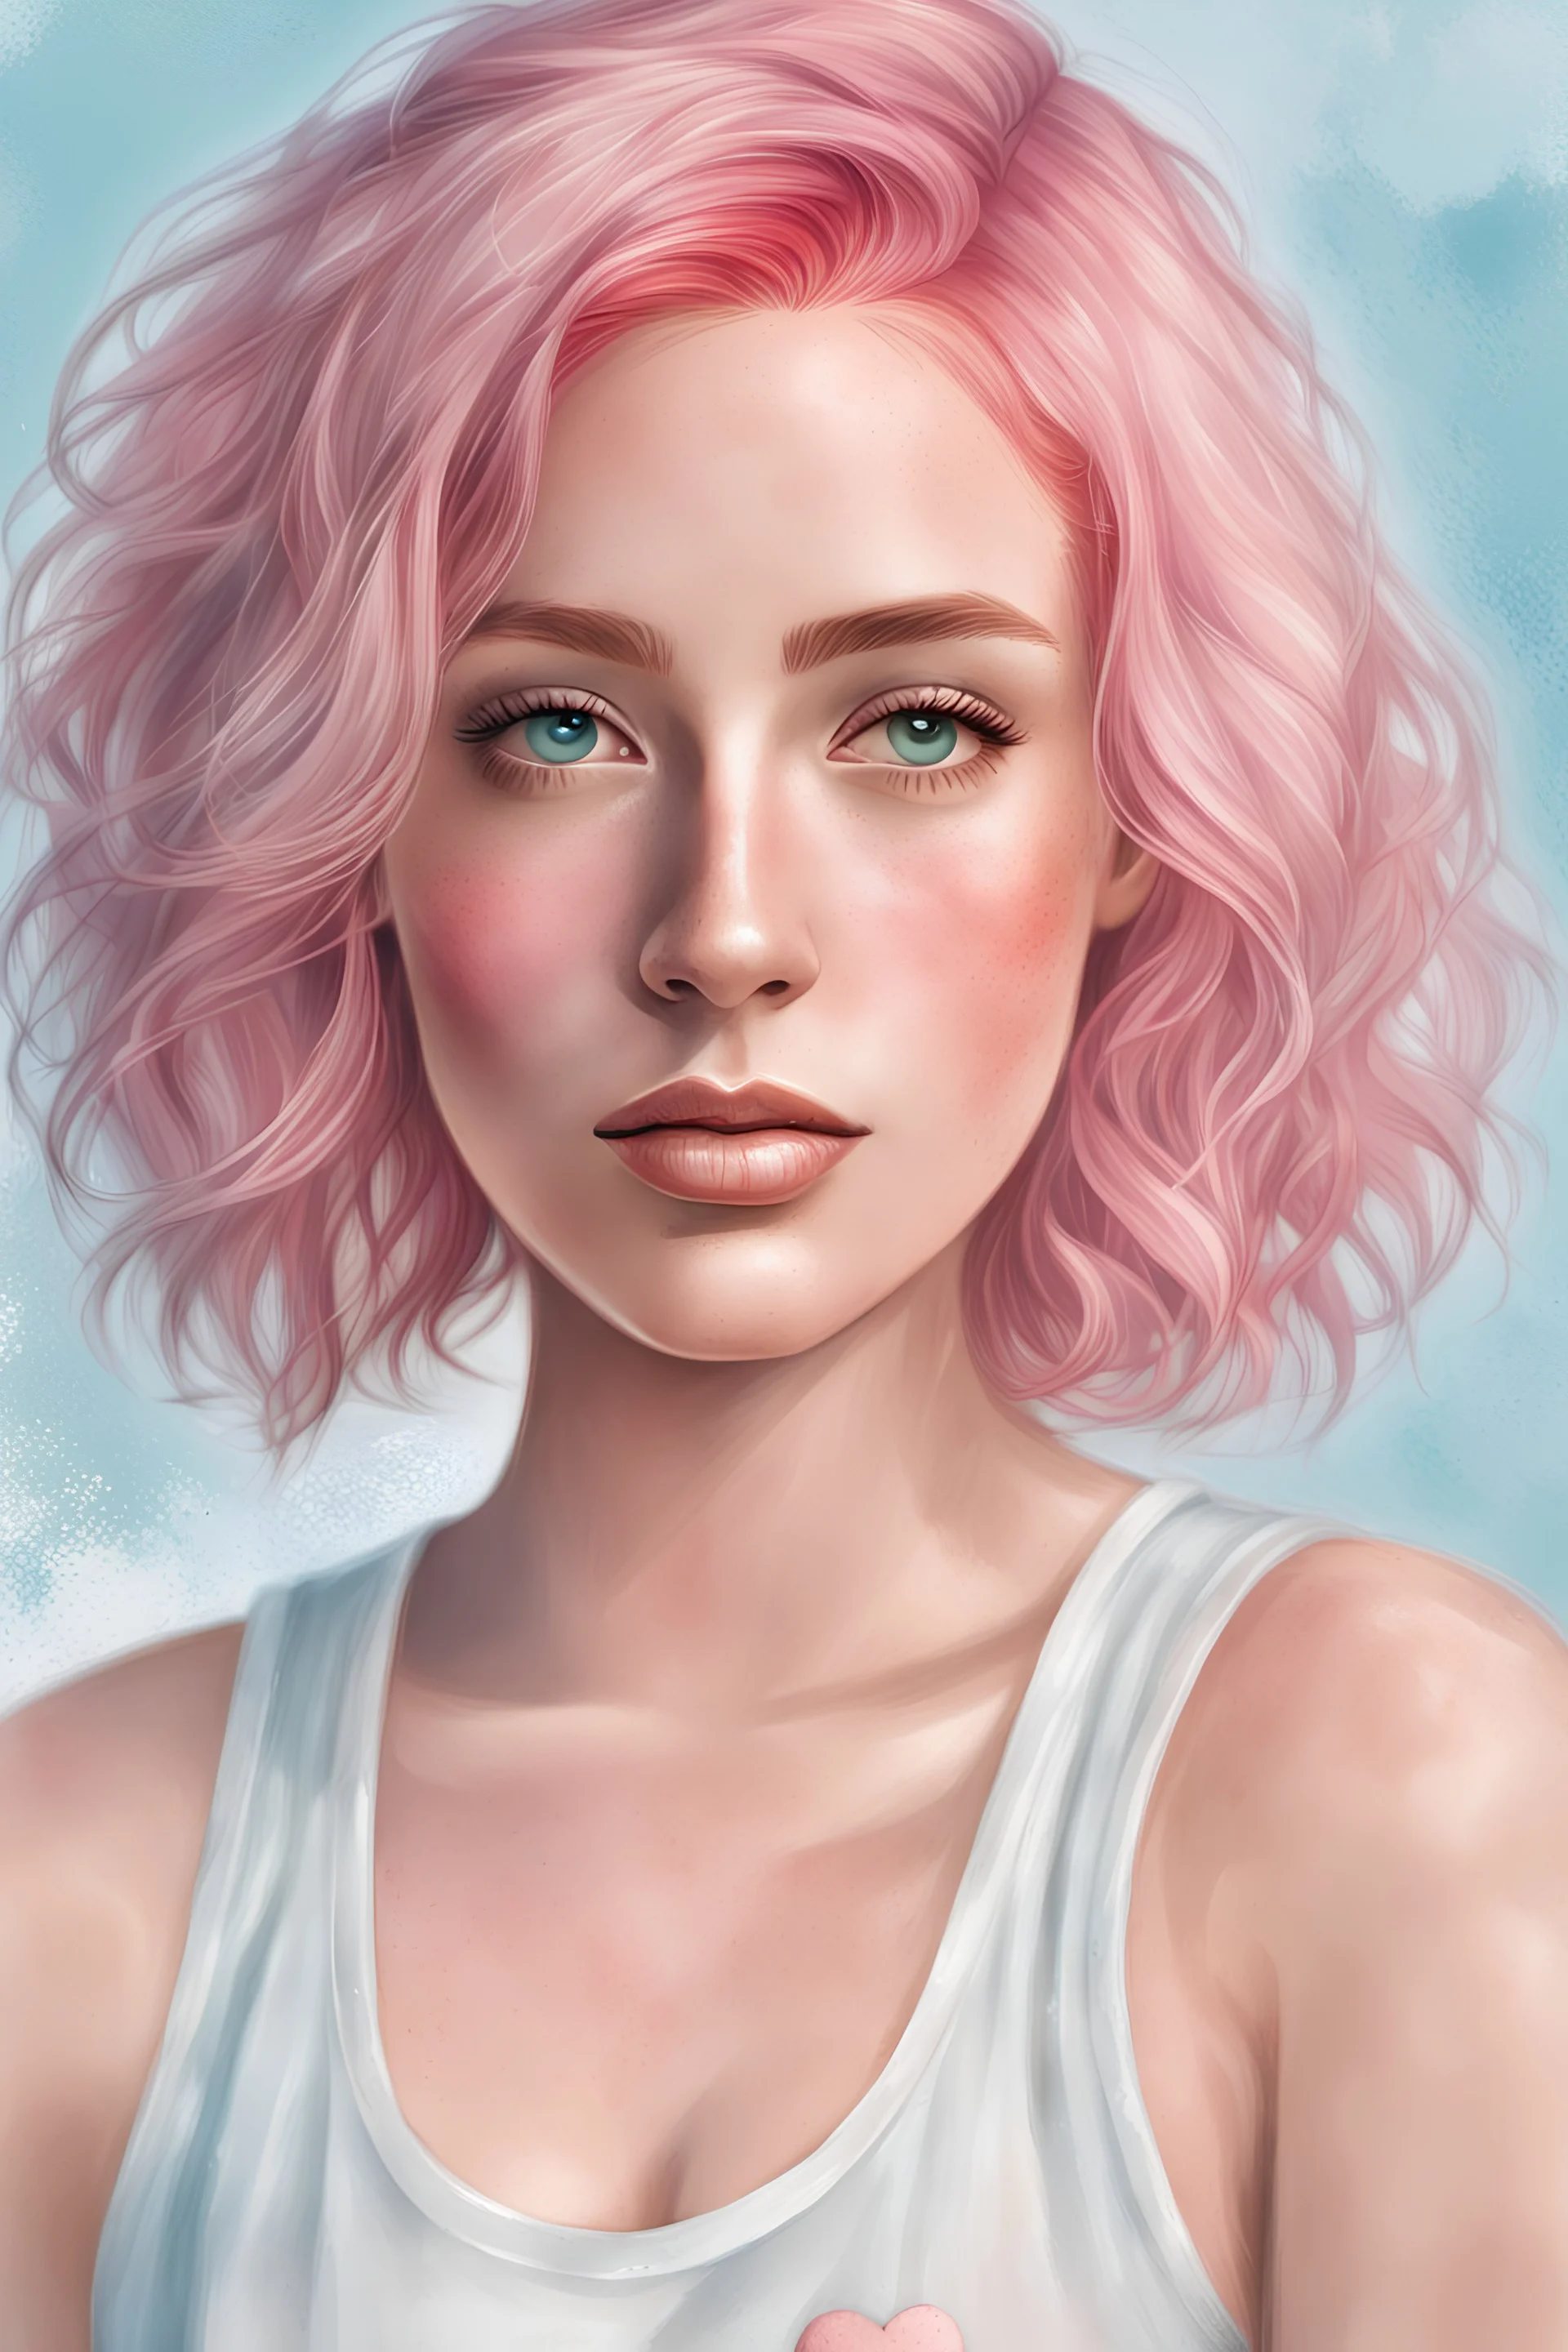 A close-up portrait of a beautiful woman with pink hair, freckles, and a heart-shaped blush on her cheek. She is looking at the viewer with her big, brown eyes. She is wearing a white tank top. The background is a light blue-gray. The image is in a soft, painterly style in flat oily glassy style.